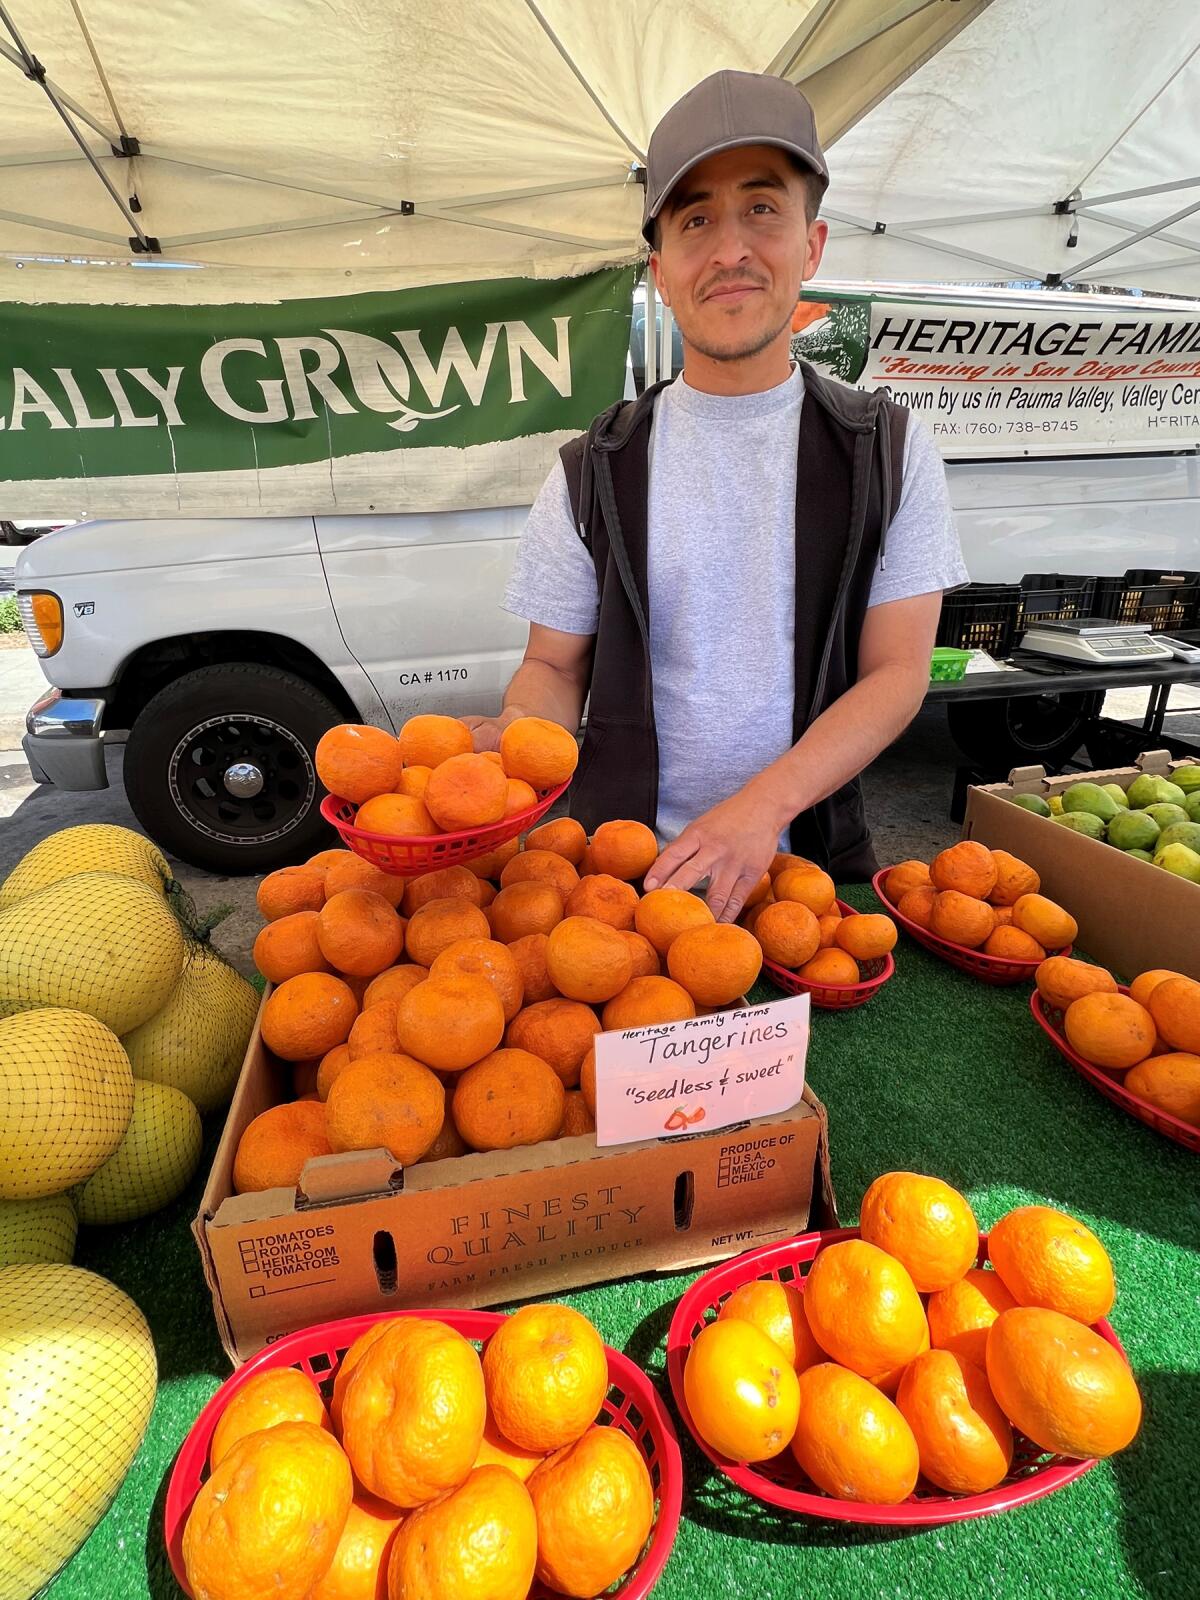 Carmelo Martinez of Heritage Family Farm with some of the citrus and avocados he brought to the PB Farmers Market.